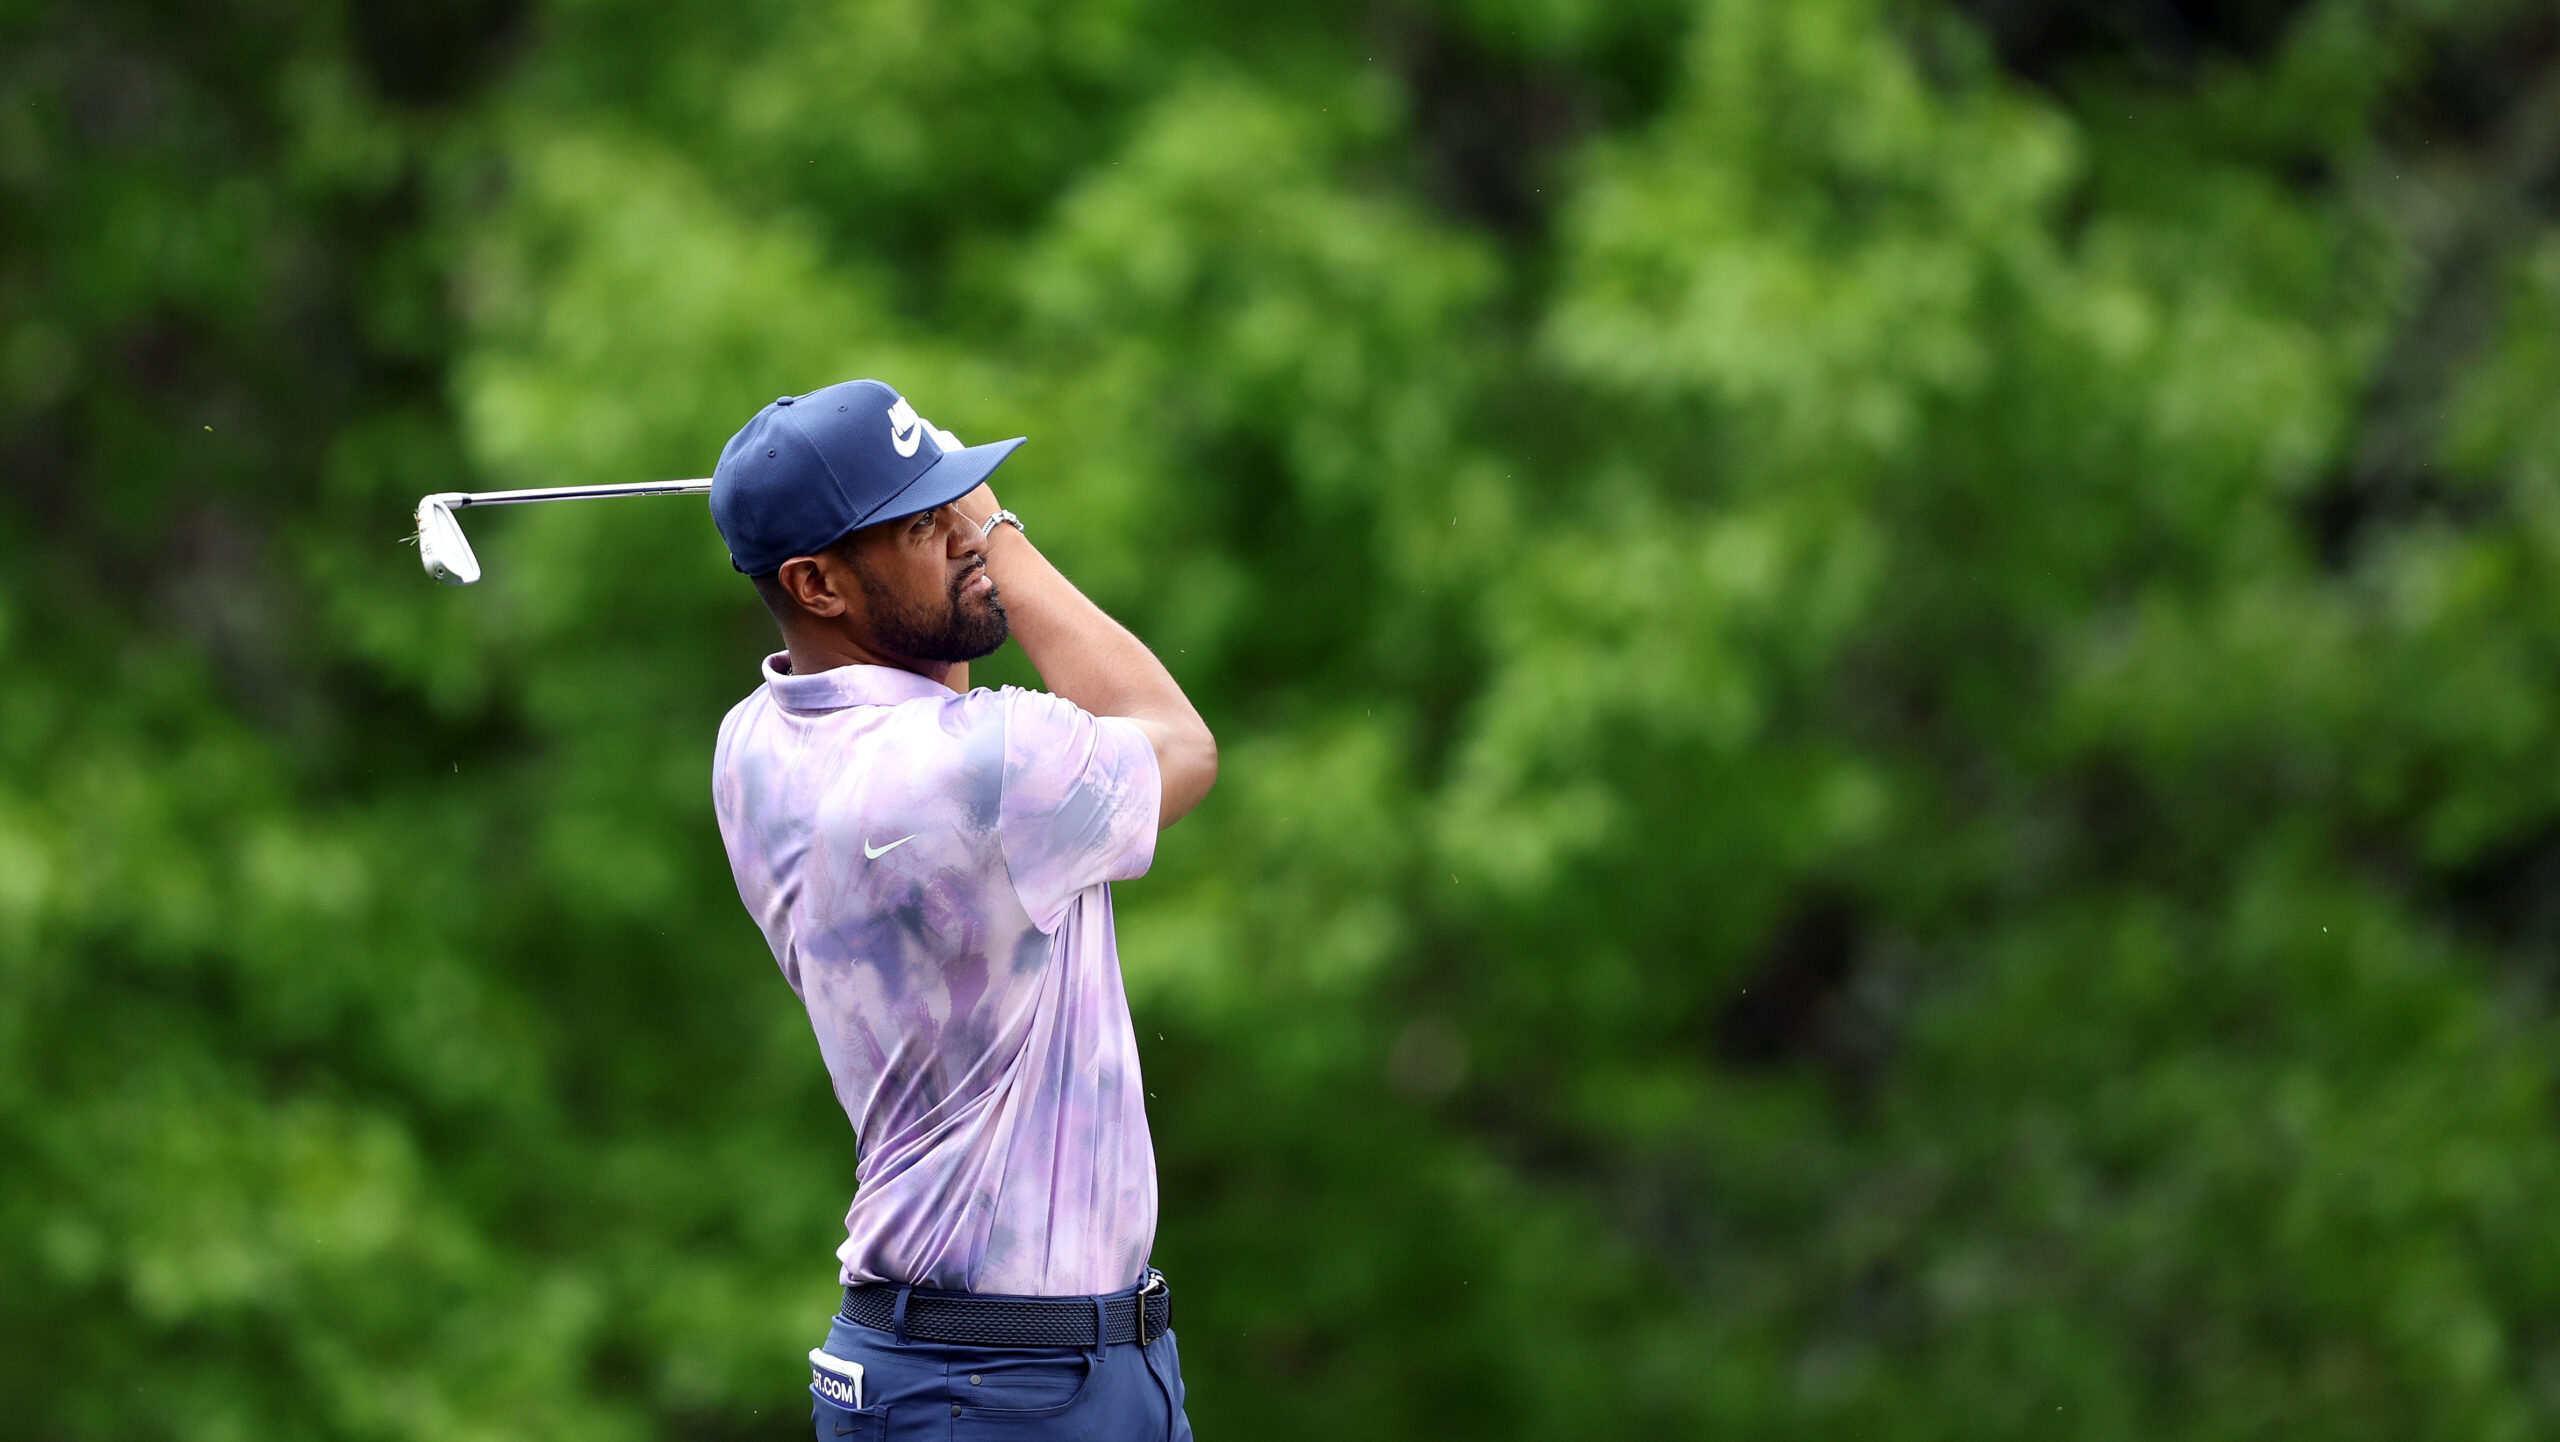 Tony Finau Finishes First Round Of Masters One-Under-Par